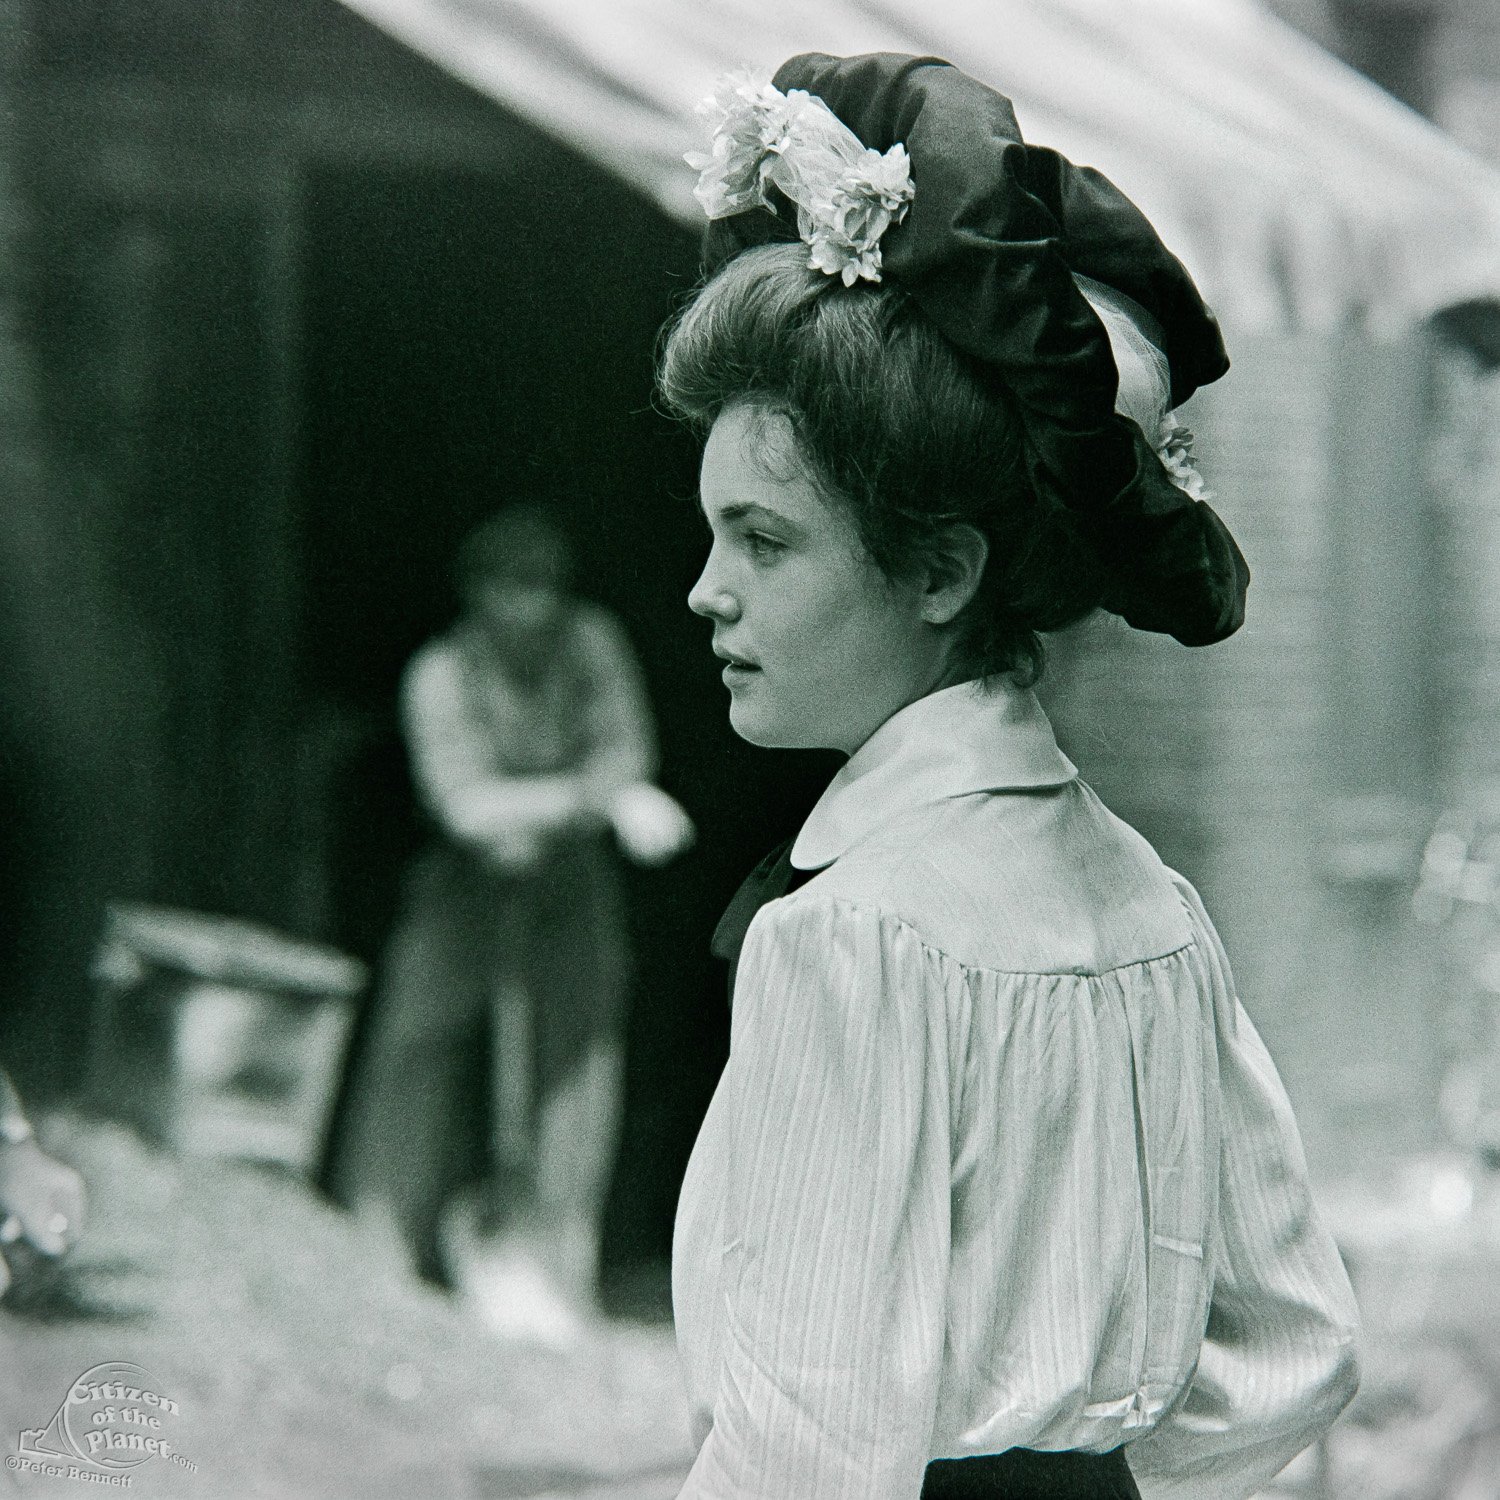  Elizabeth McGovern on the set of the film Ragtime, E 11th Street 